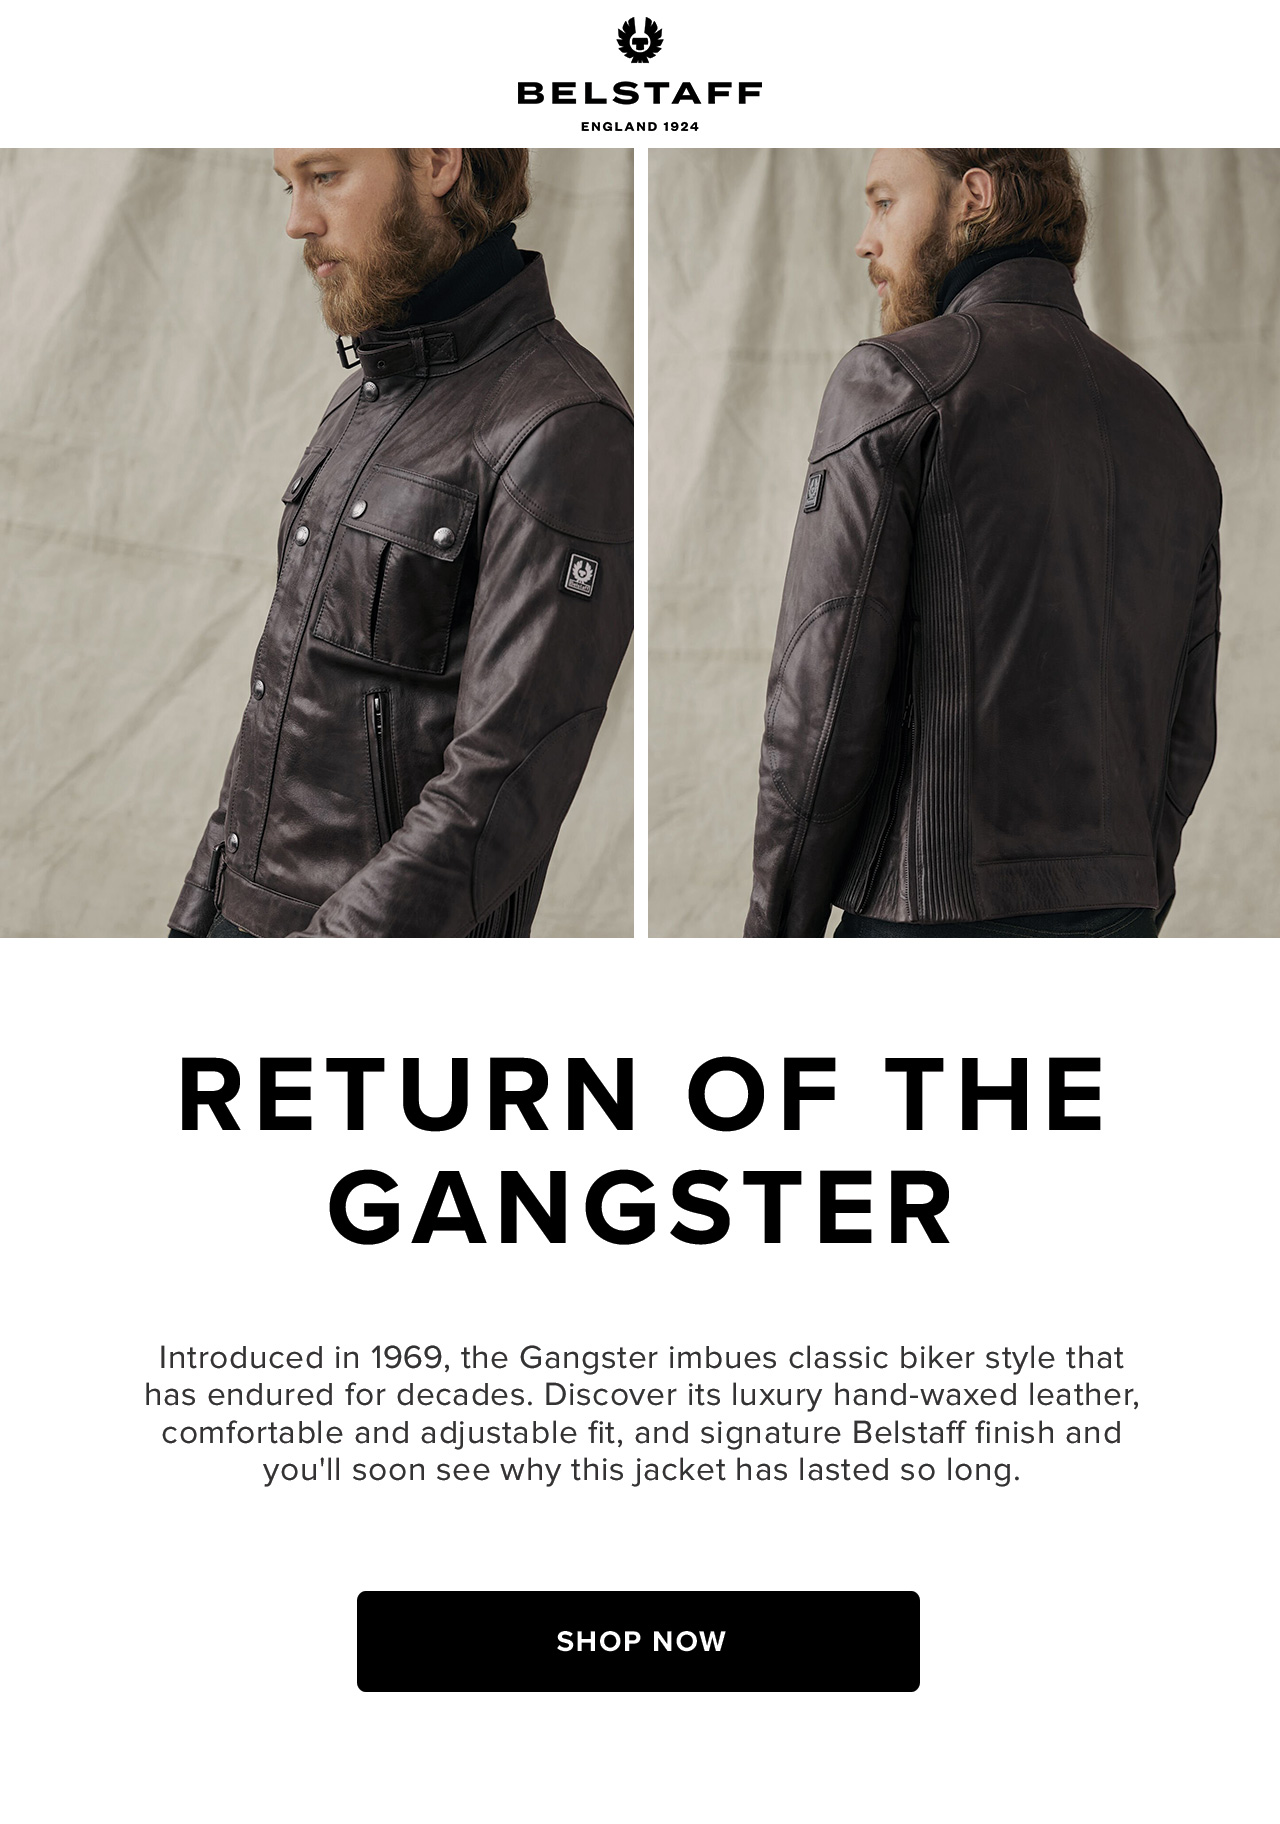 ntroduced in 1969, the Gangster imbues classic biker style that has endured for decades. Shop Now.